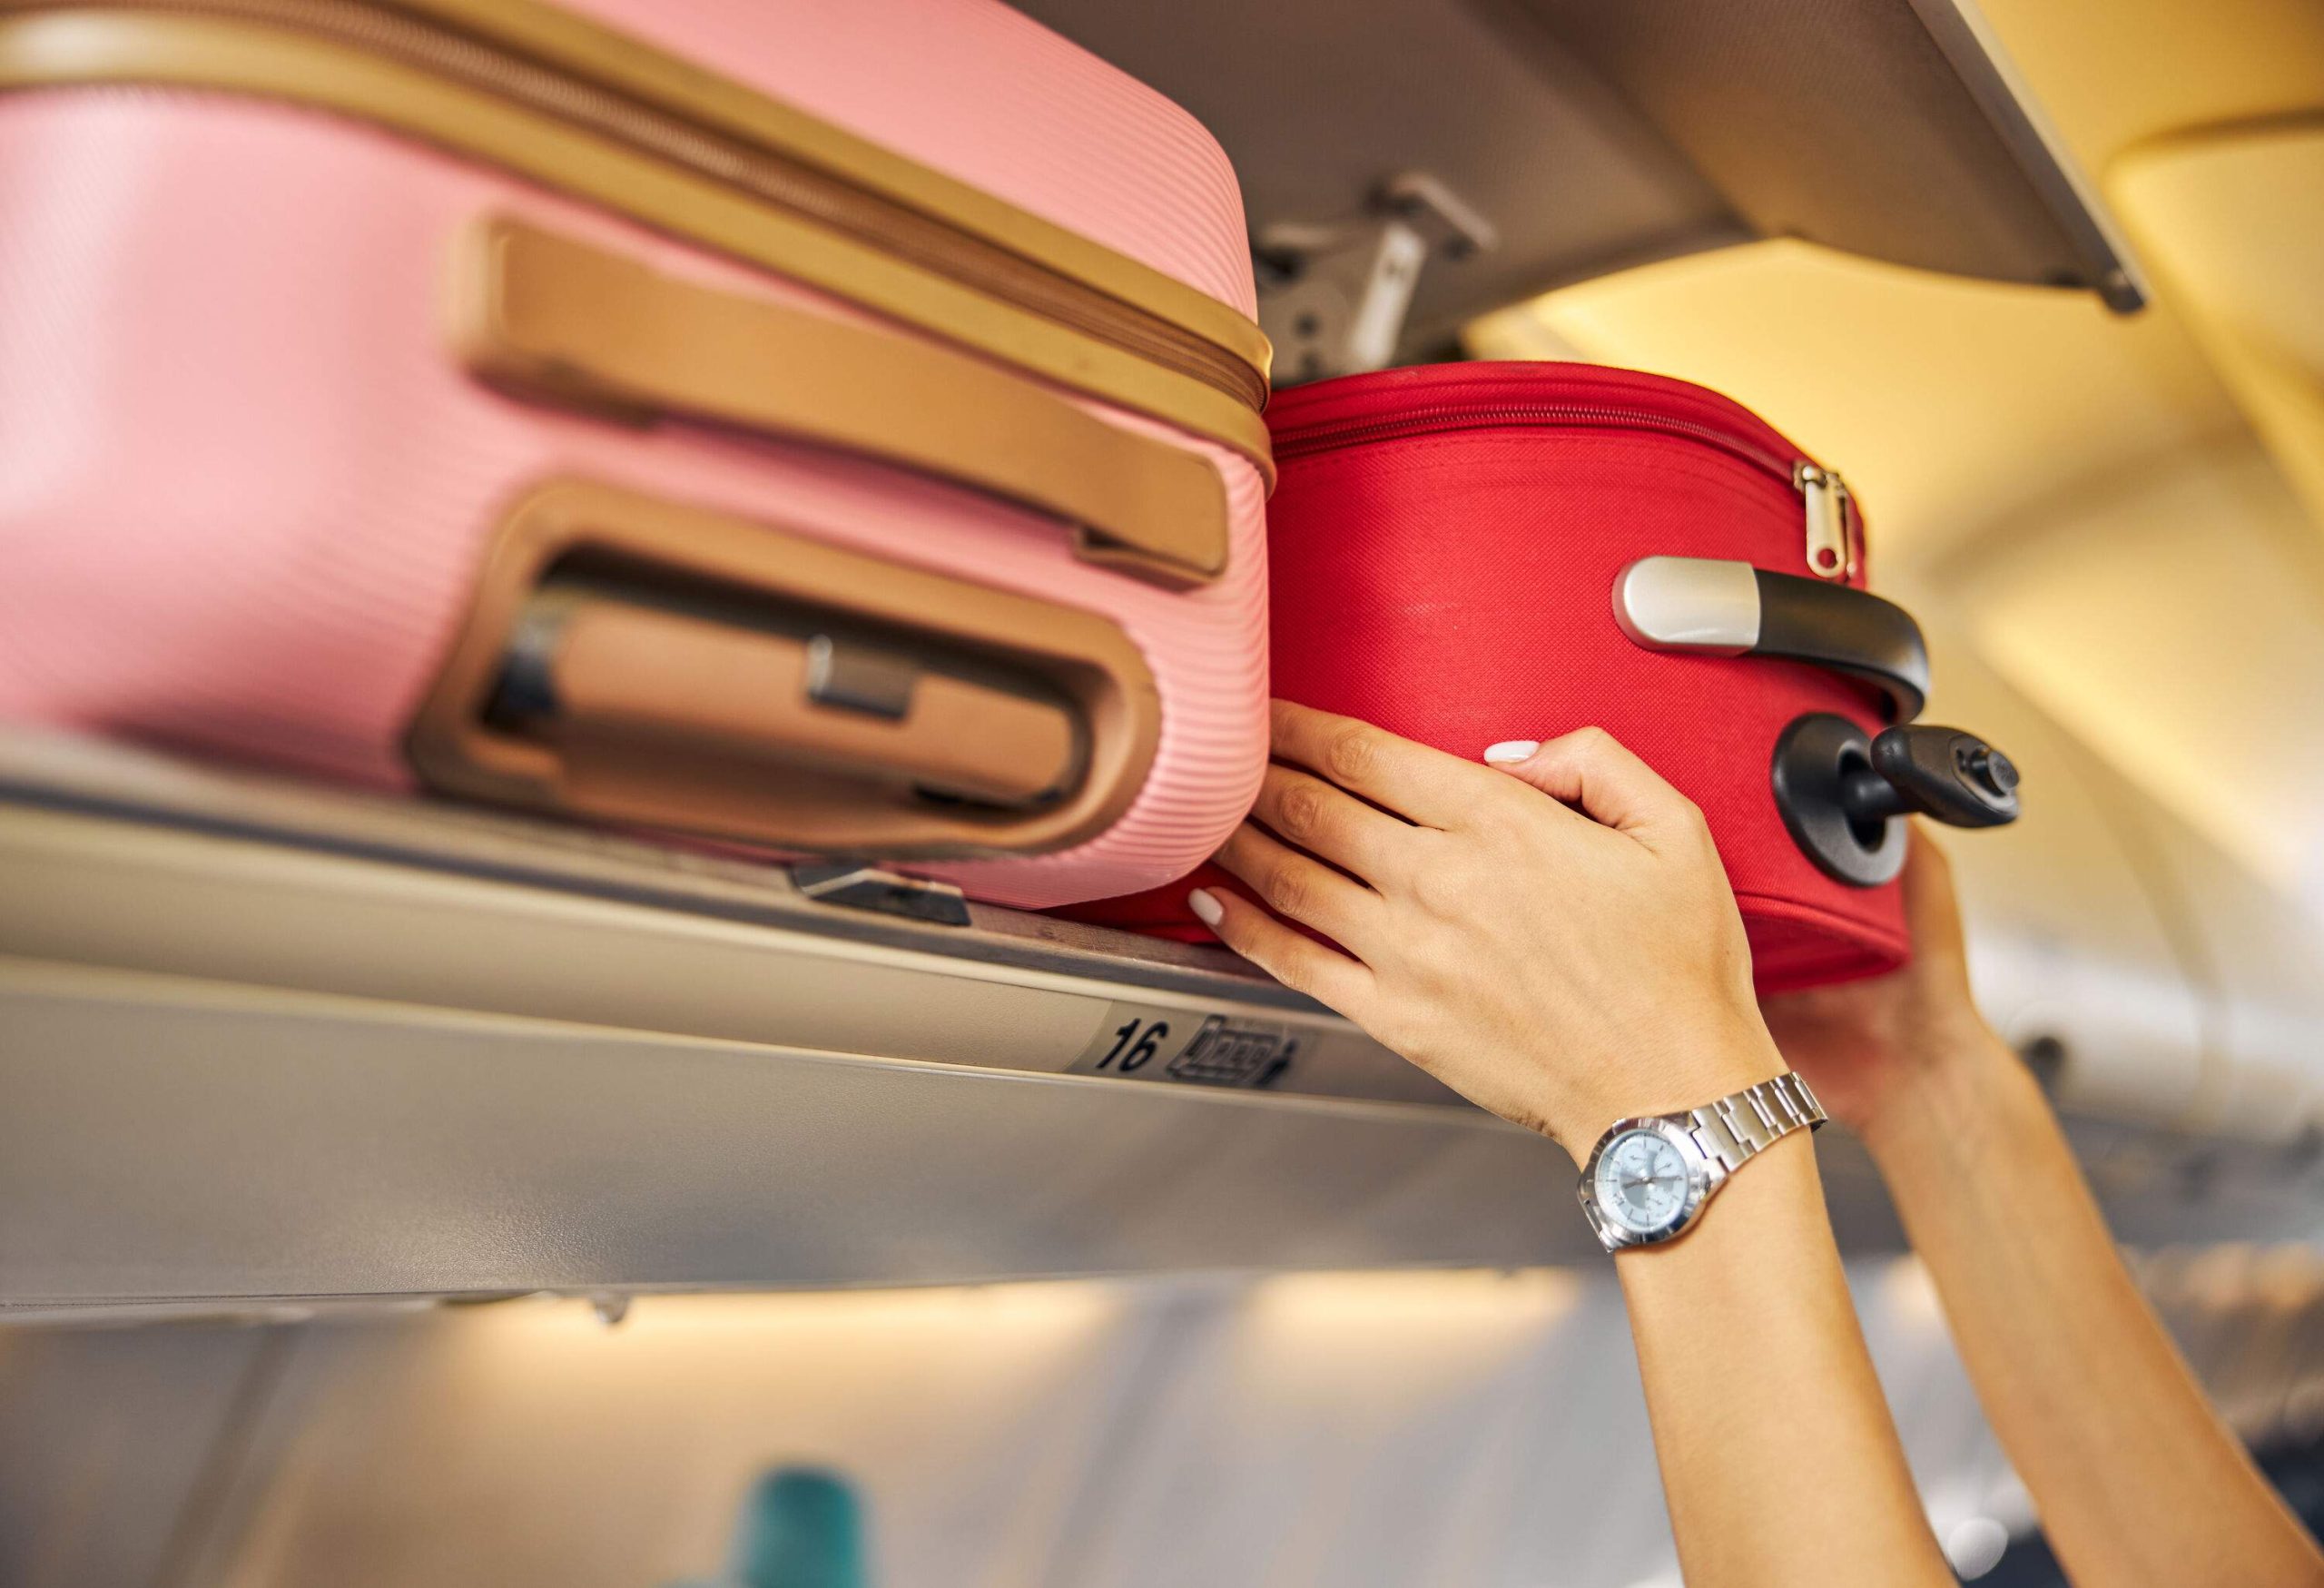 A woman squeezing a red suitcase into the overhead compartment's limited space.